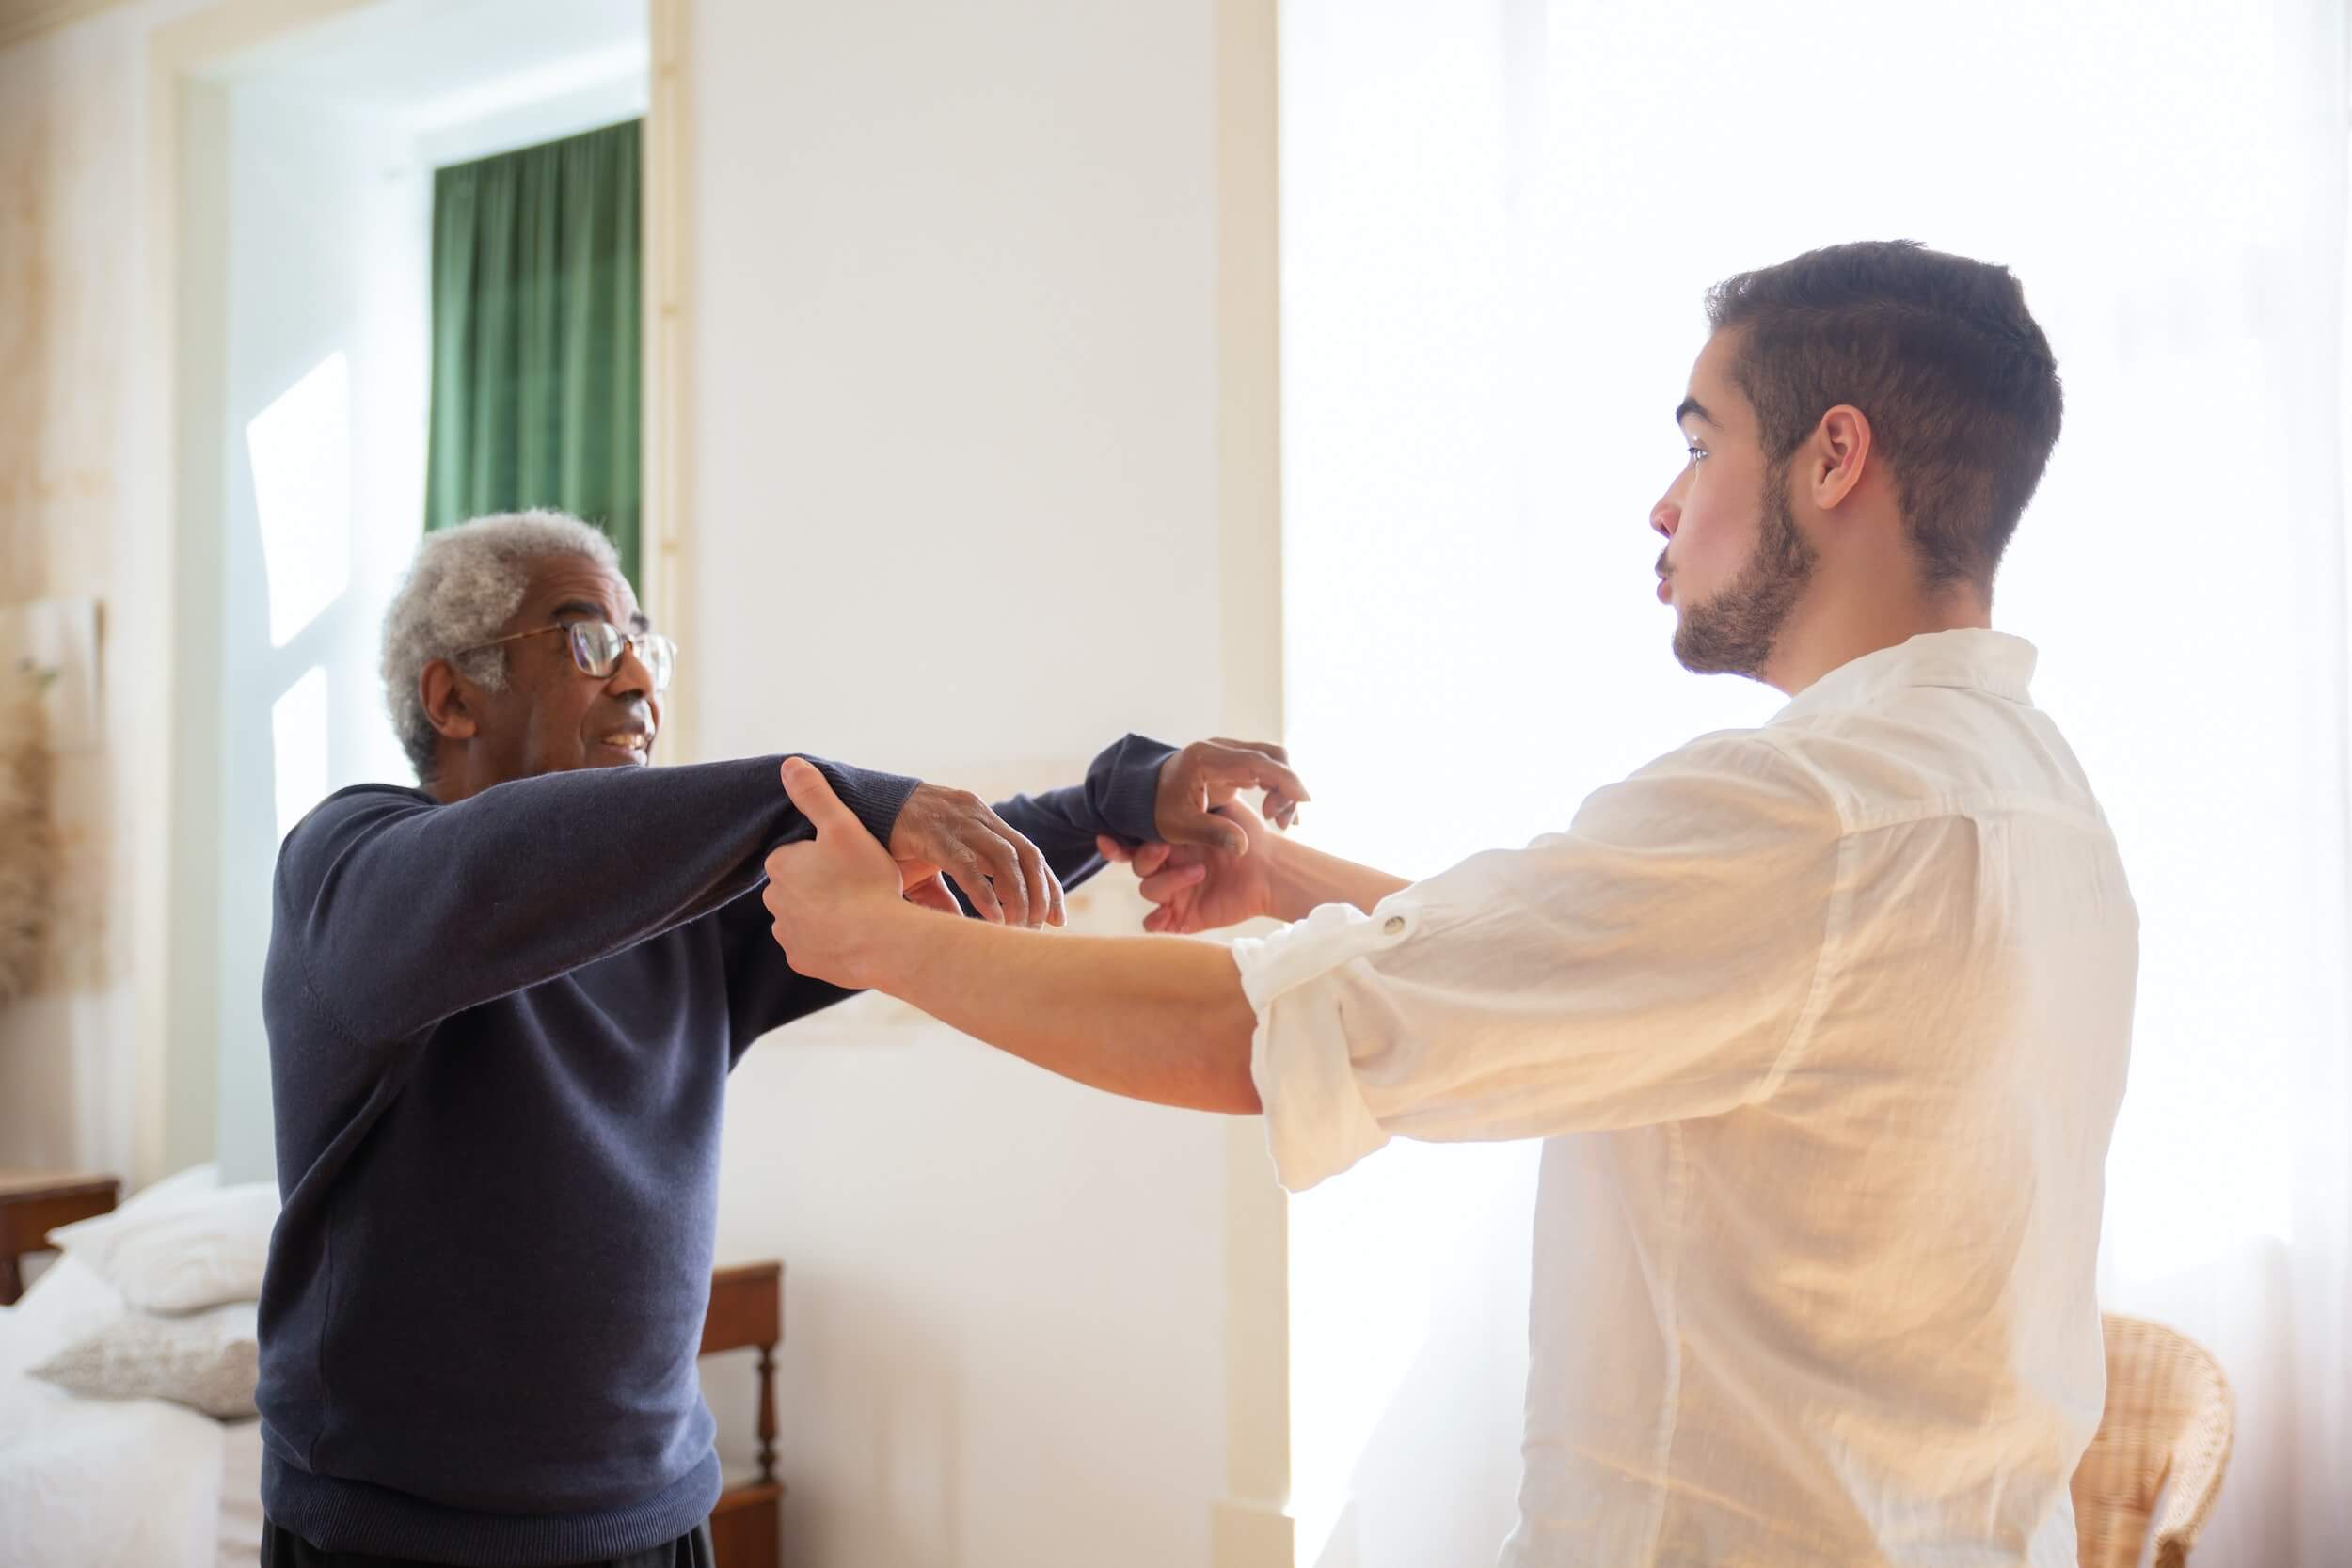 Care assistant wearing a white shift raising the arms of an older service user.